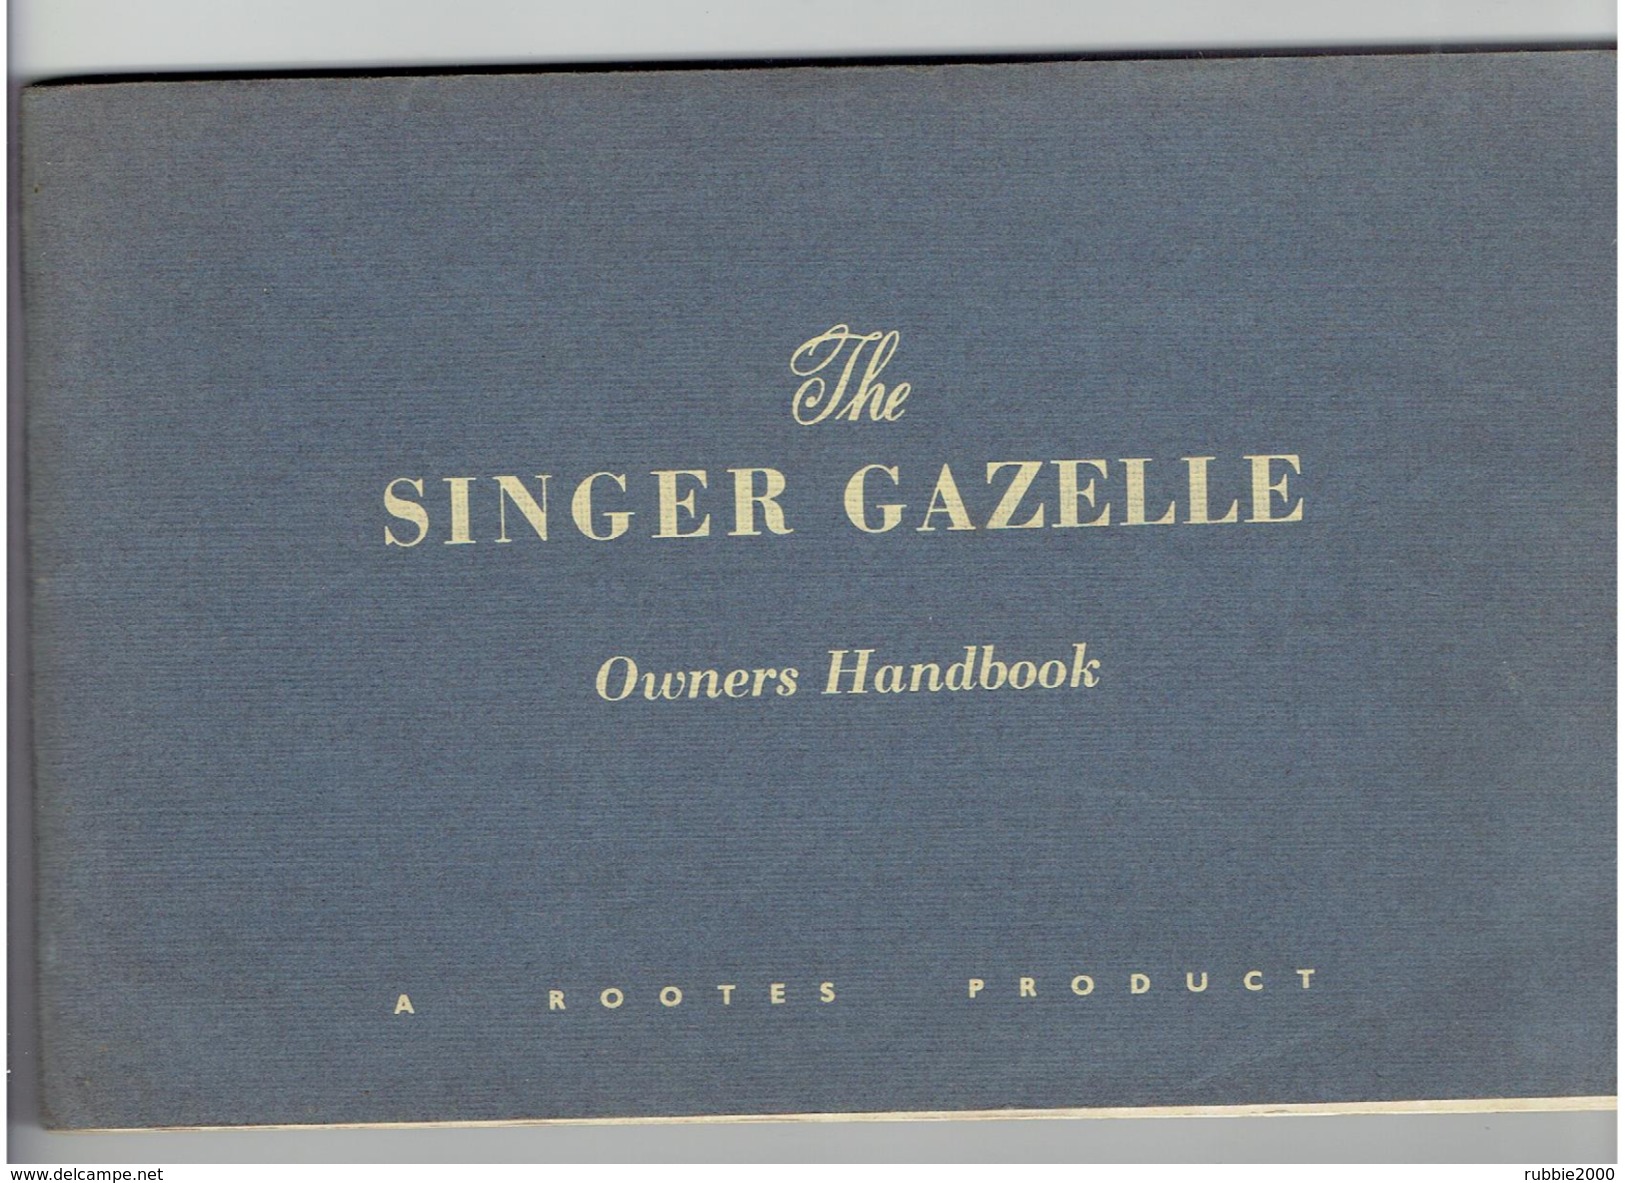 THE SINGER GAZELLE OWNERS HANDBOOK ISSUED 1958 SINGER MOTORS LIMITED COVENTRY ENGLAND A ROOTES PRODUCT - Trasporti